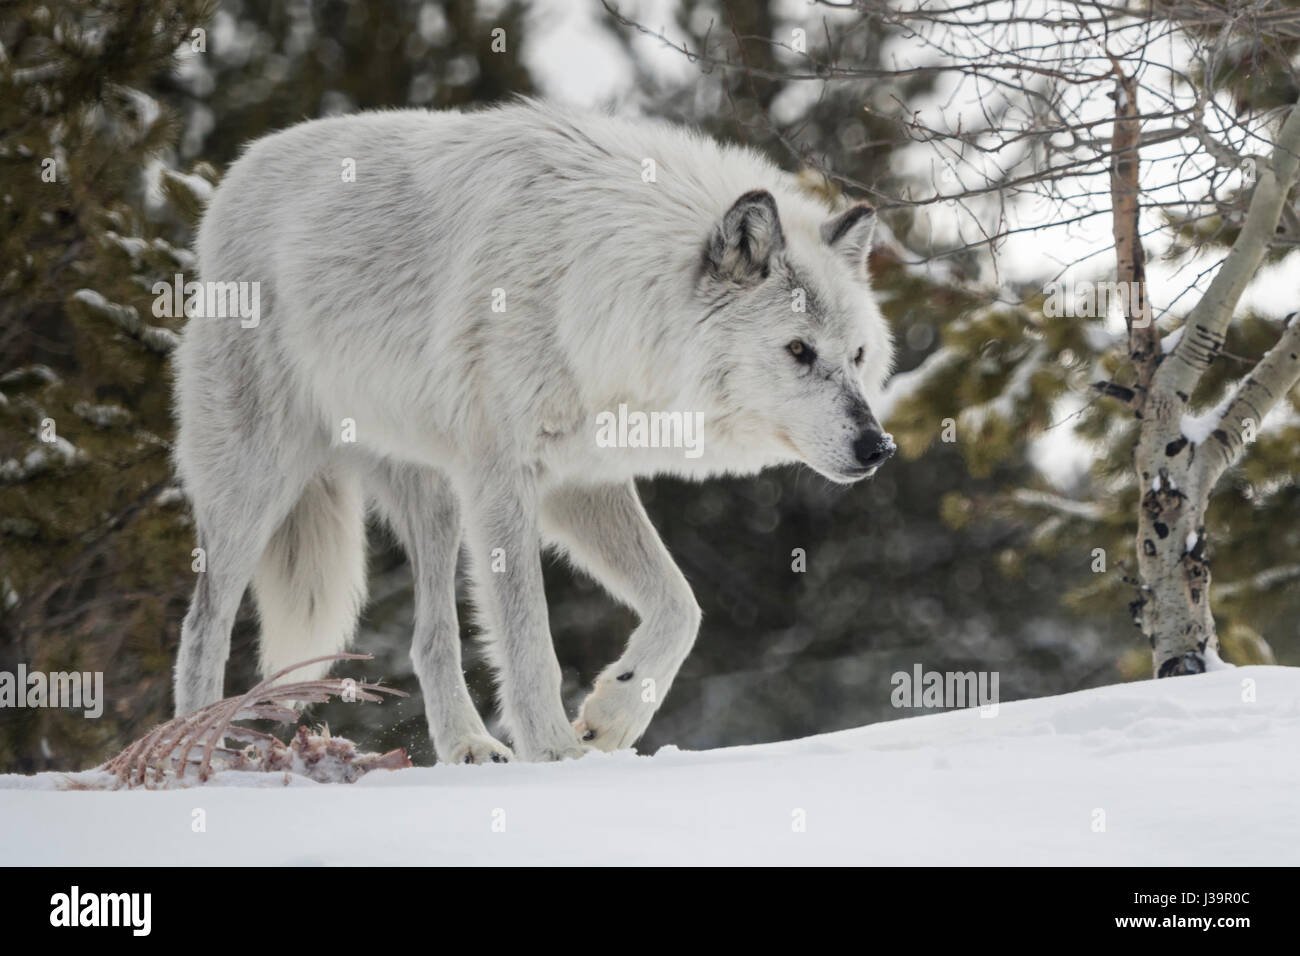 Gray Wolf / Wolf (Canis lupus) in winter, walking away after feeding at a carcass, in snow, natural surrounding, capitive, Yellowstone area, MT, USA. Stock Photo